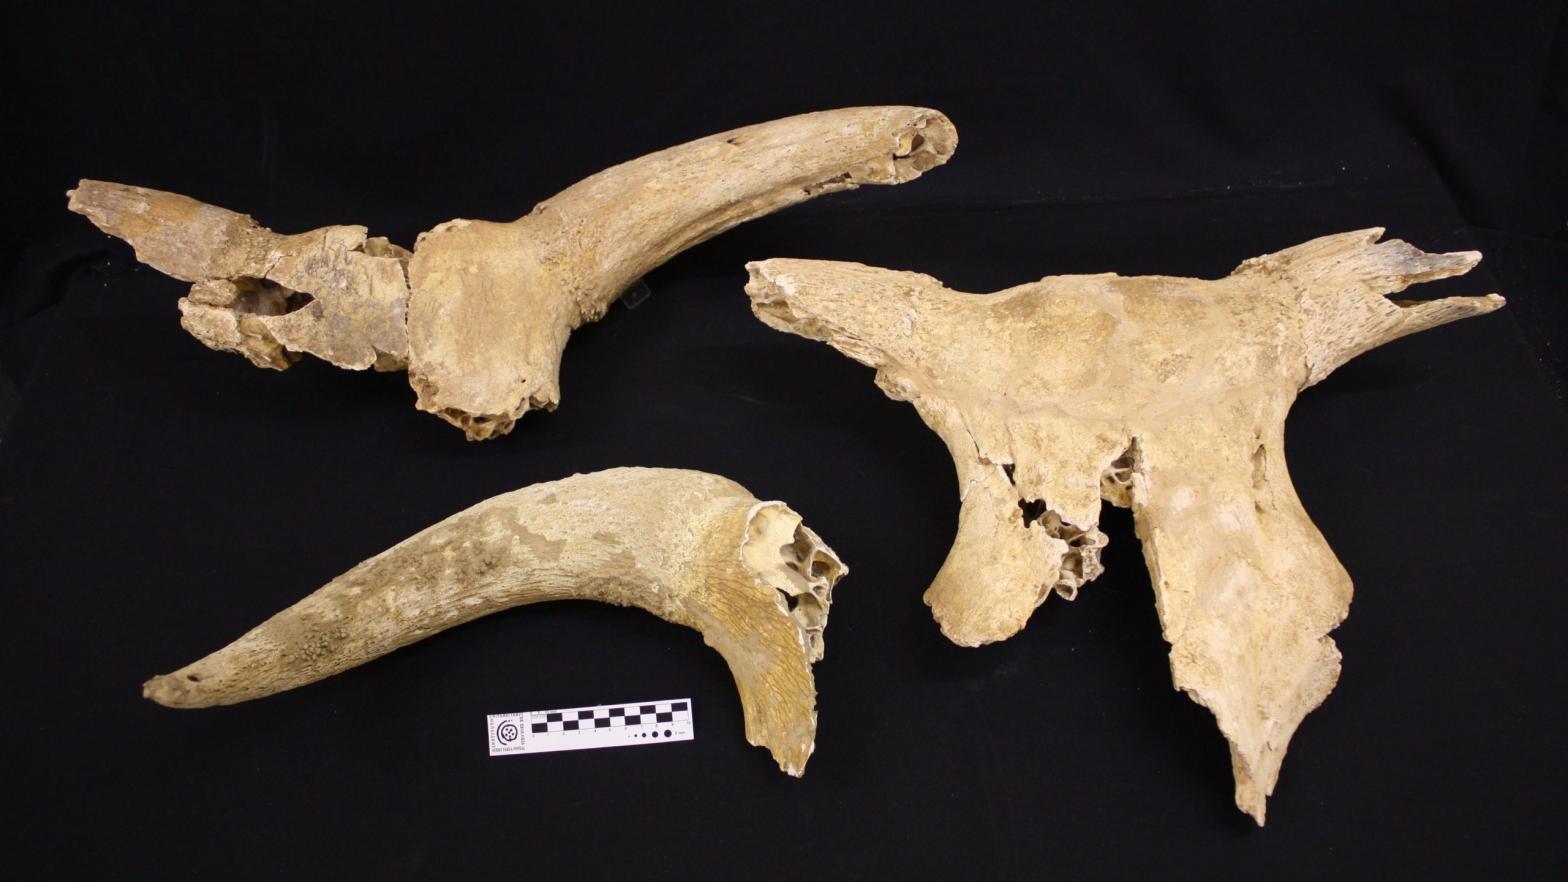 Some of the auroch bones found in a cave in Galicia, Spain. (Photo: UDC)